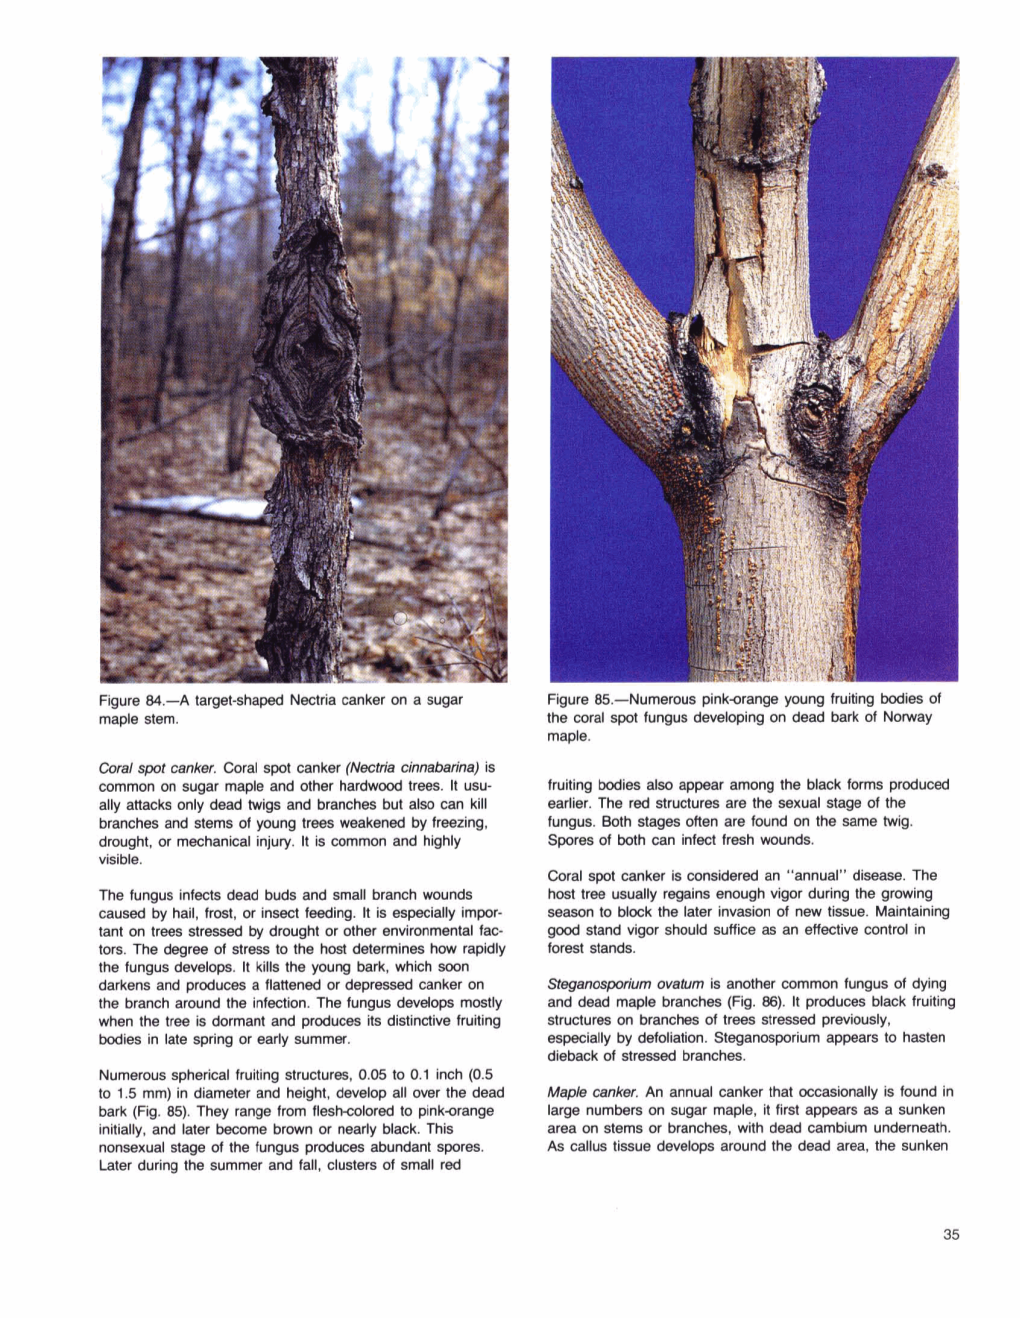 Figure 84.-A Target-Shaped Nectria Canker on a Sugar Maple Stem